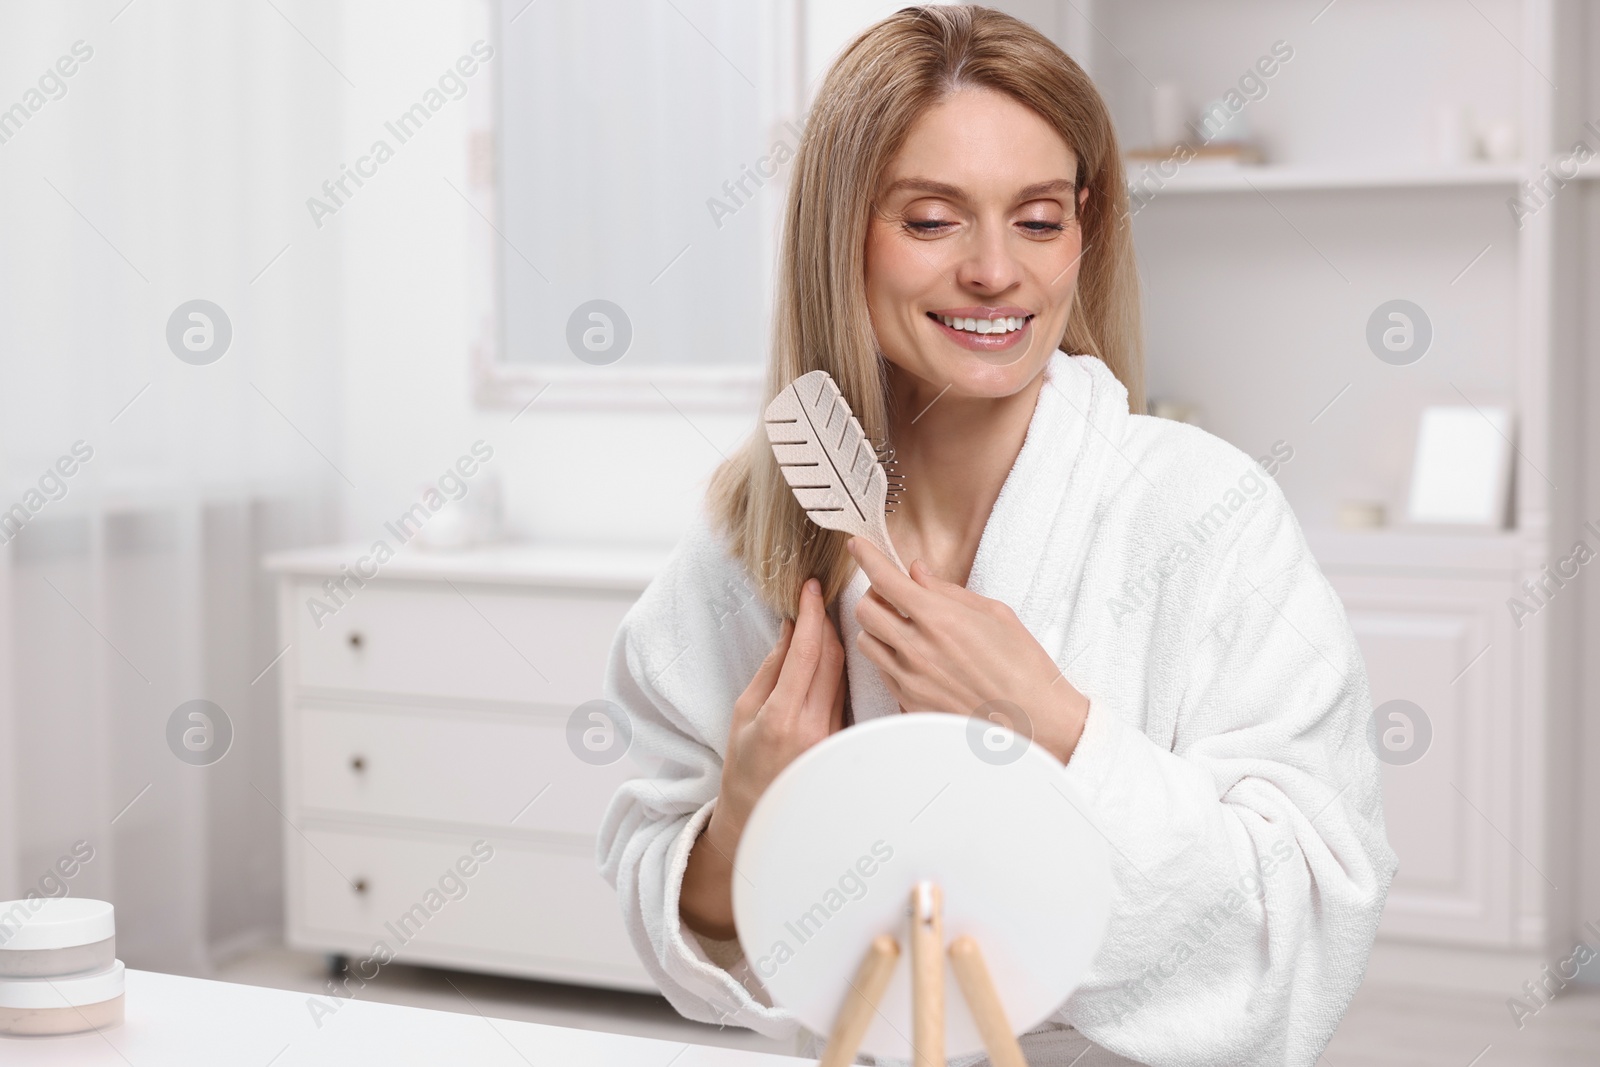 Photo of Beautiful woman brushing her hair in room